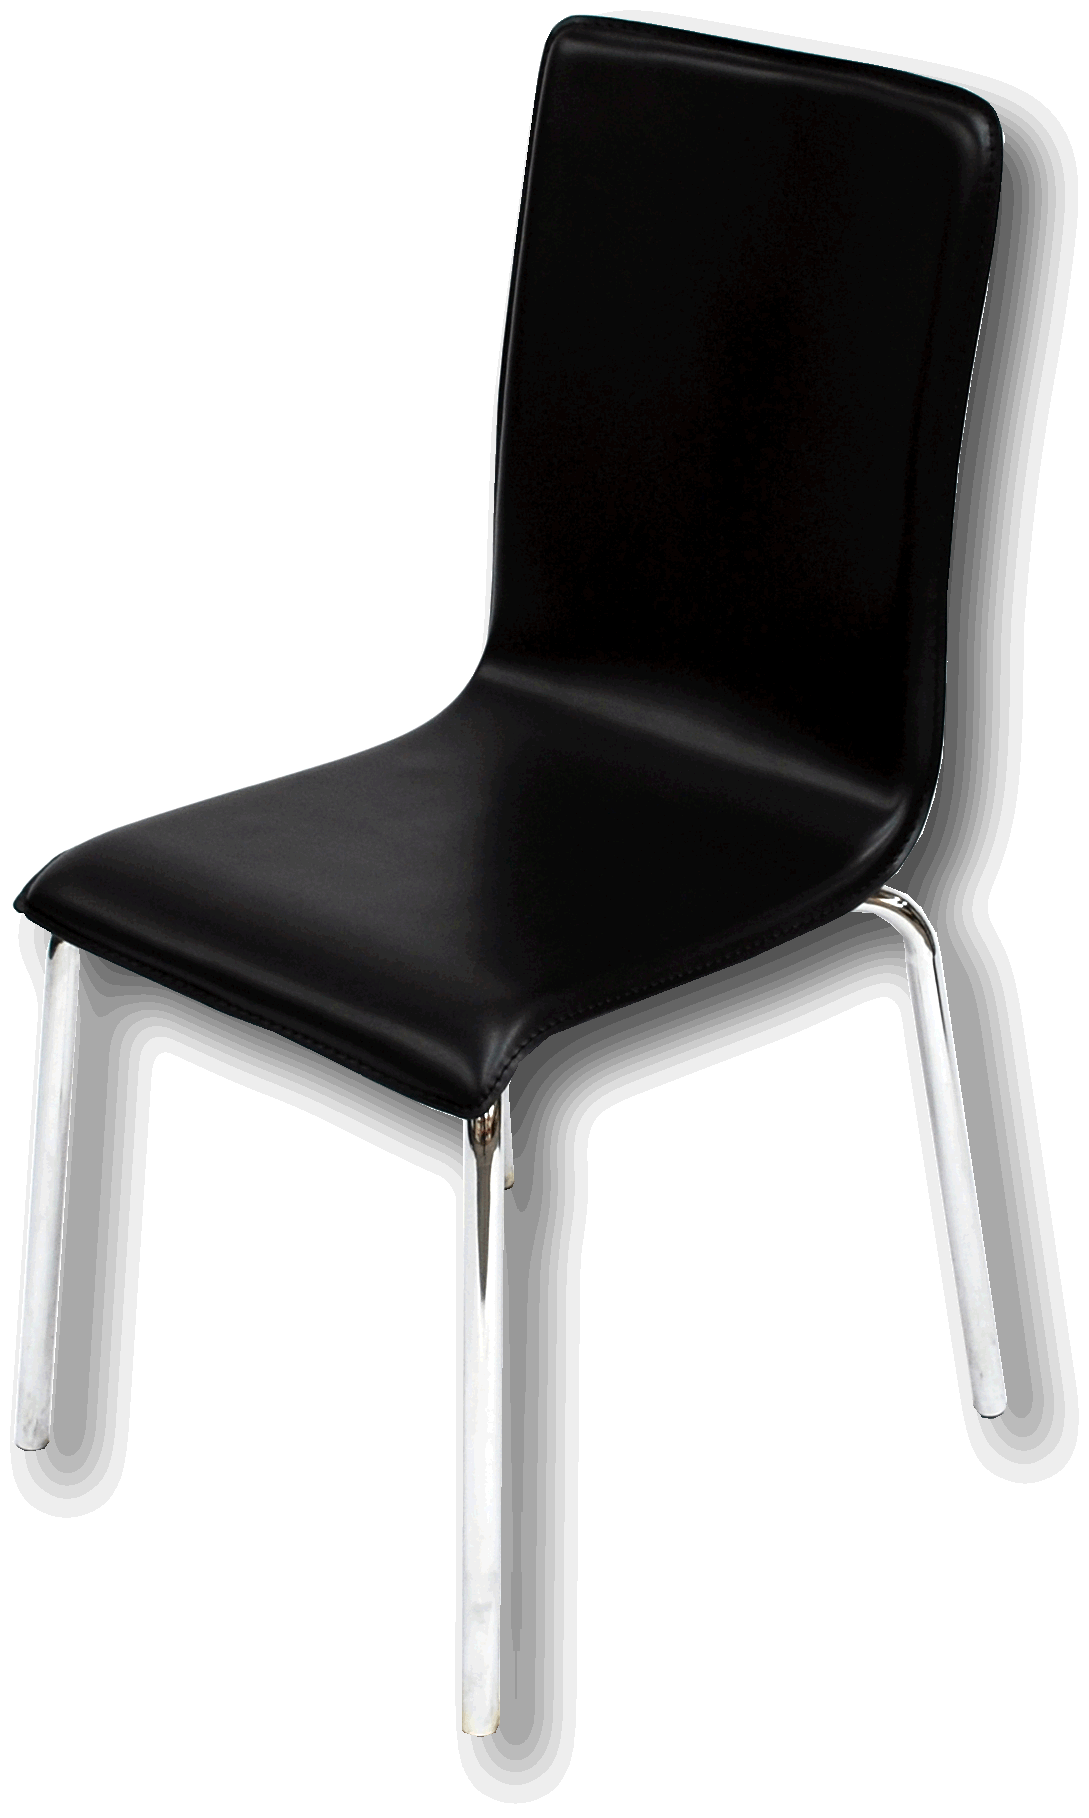 Chair PNG Picture